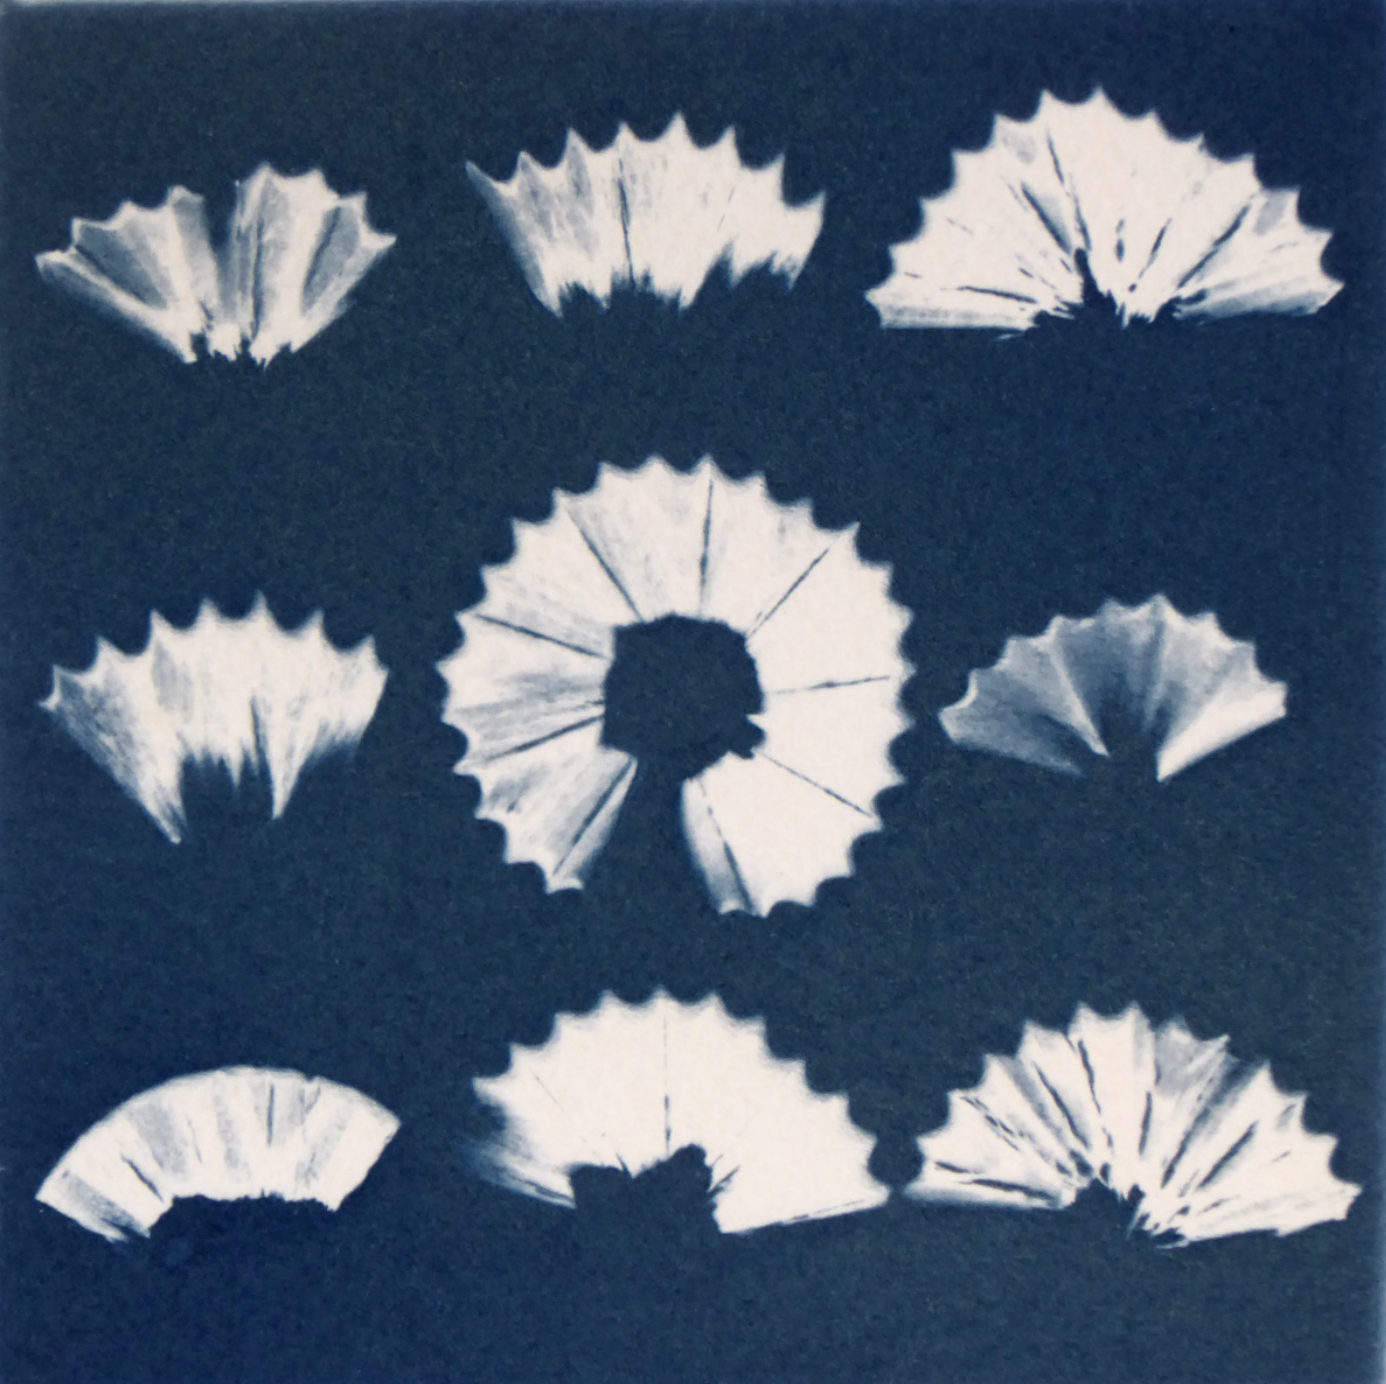 "Making Photographs without a Camera" - Cyanotype Workshop in Porto, Portugal